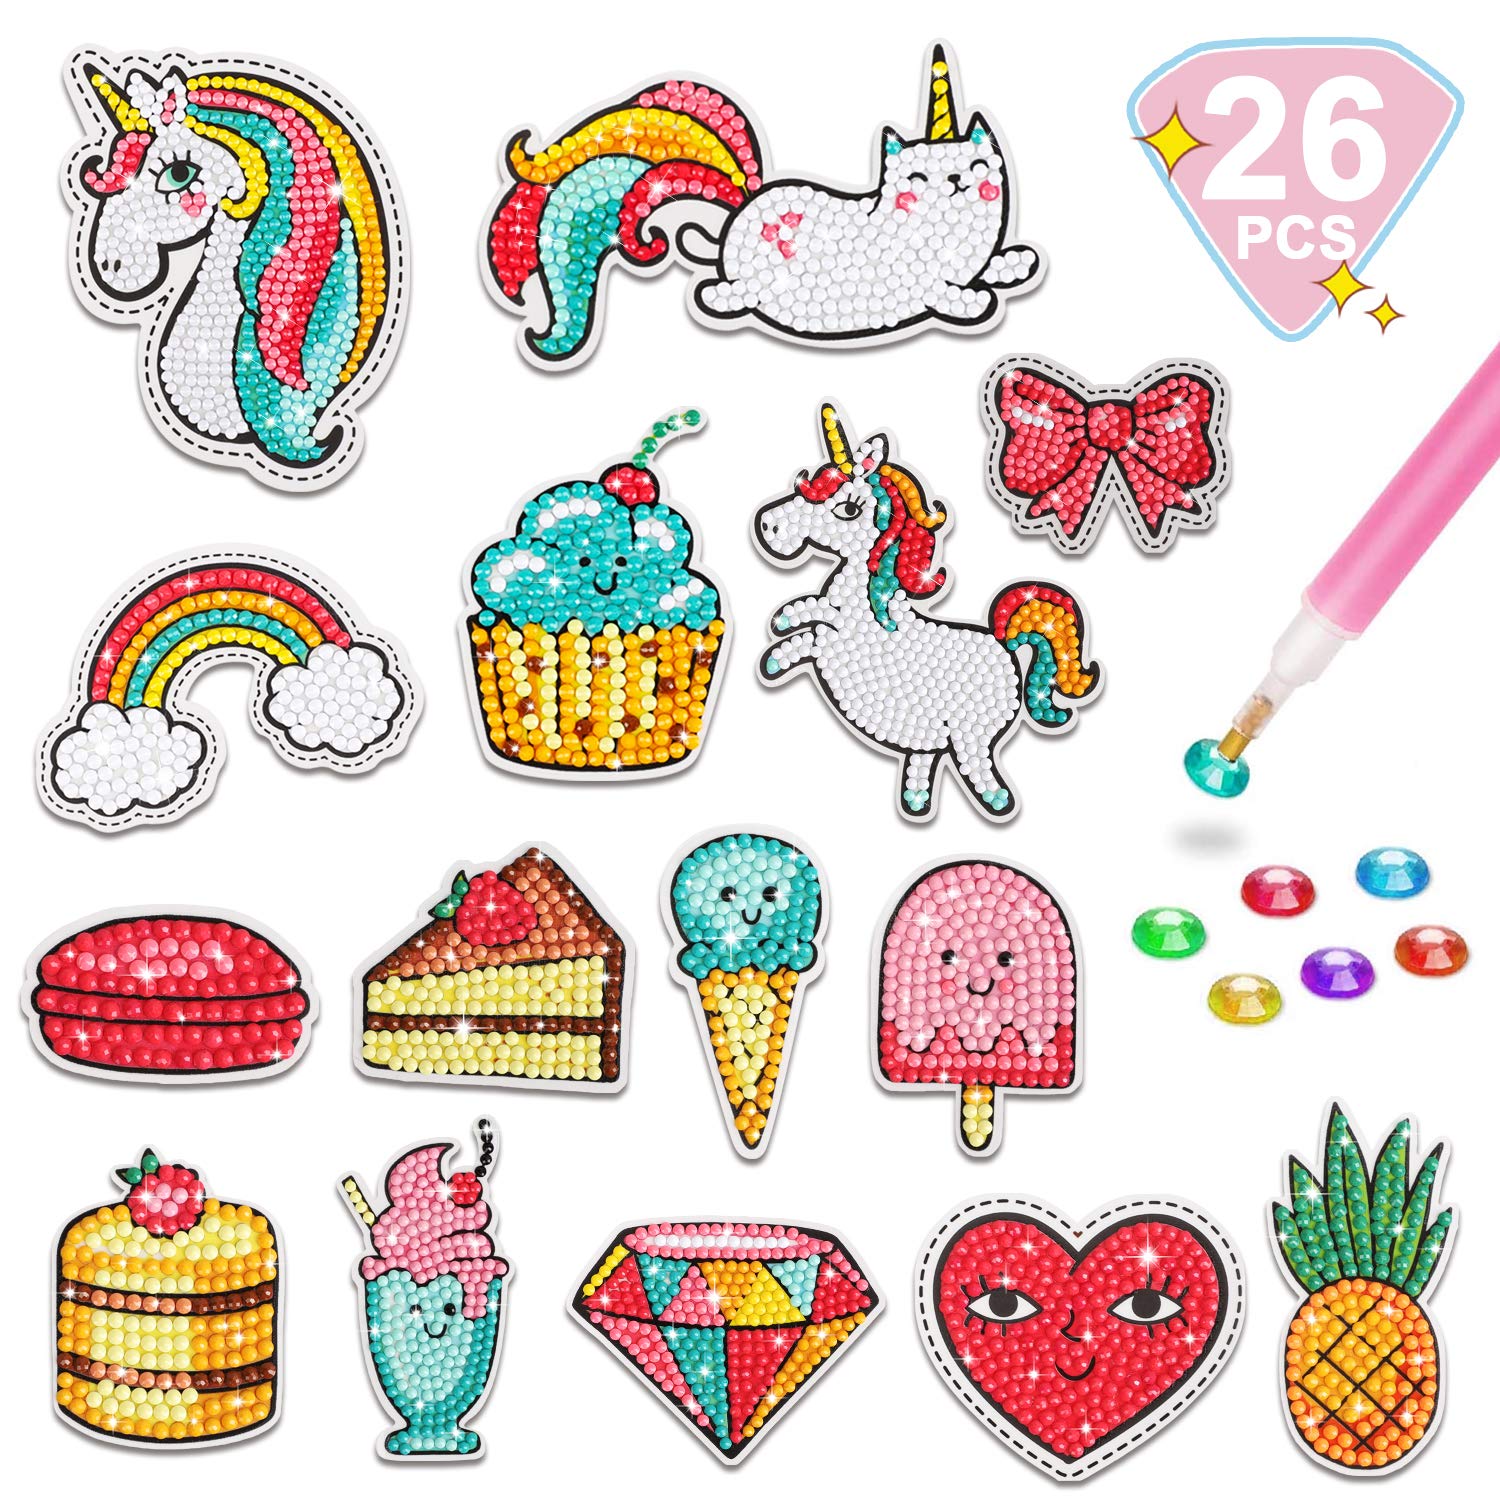 TOY Life 5D Diamond Painting Kits for Kids- Diamond Art Kids Arts and Crafts- 26pcs Diamond Painting Stickers- Diamond Art Kits- Gem Art Crafts Kits Art Set for Kids- Unicorn Diamond Painting for Kids